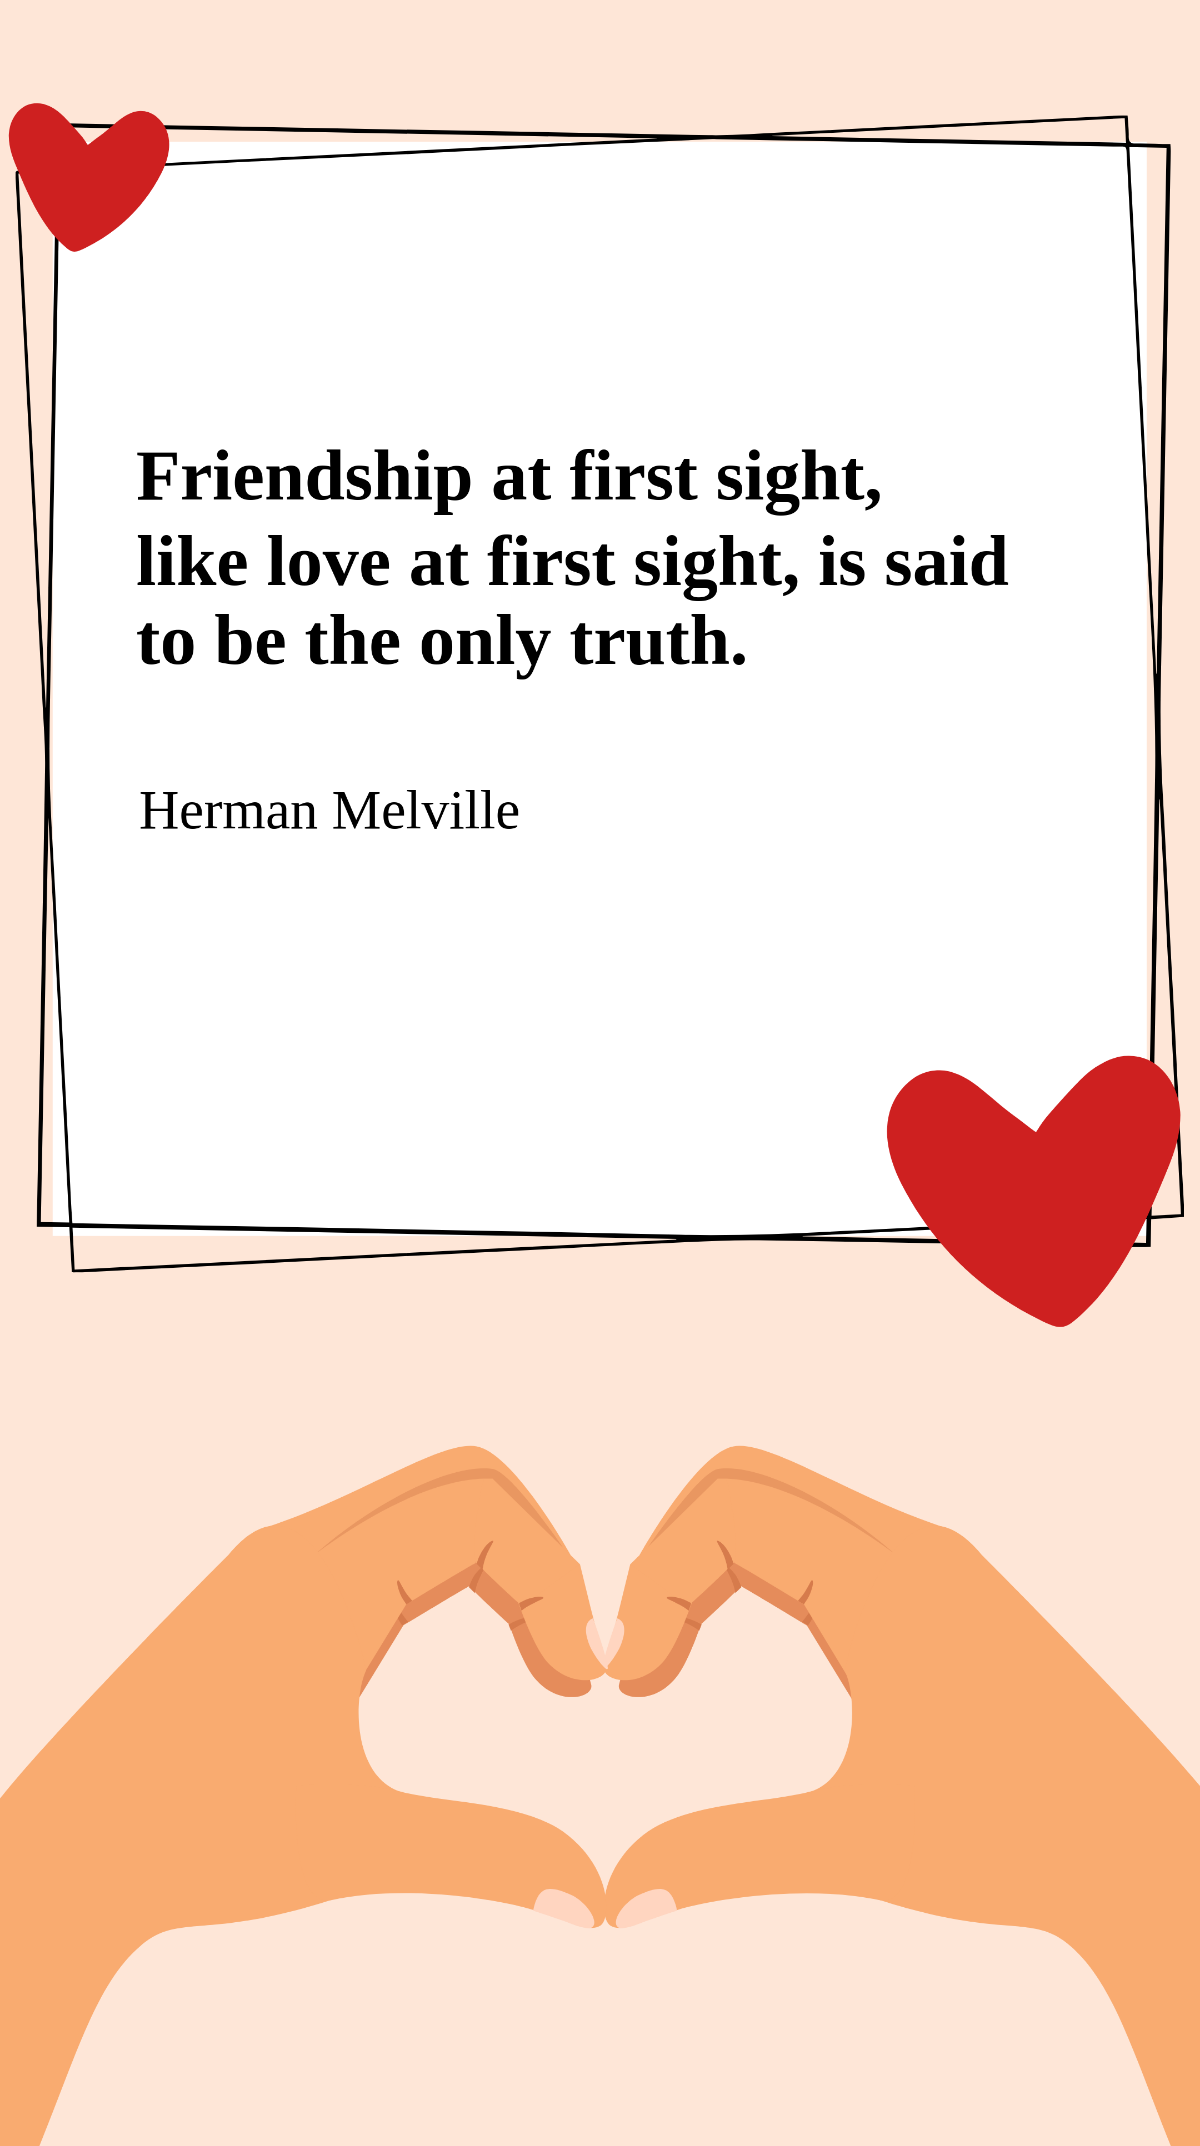 Herman Melville - Friendship at first sight, like love at first sight, is said to be the only truth. Template